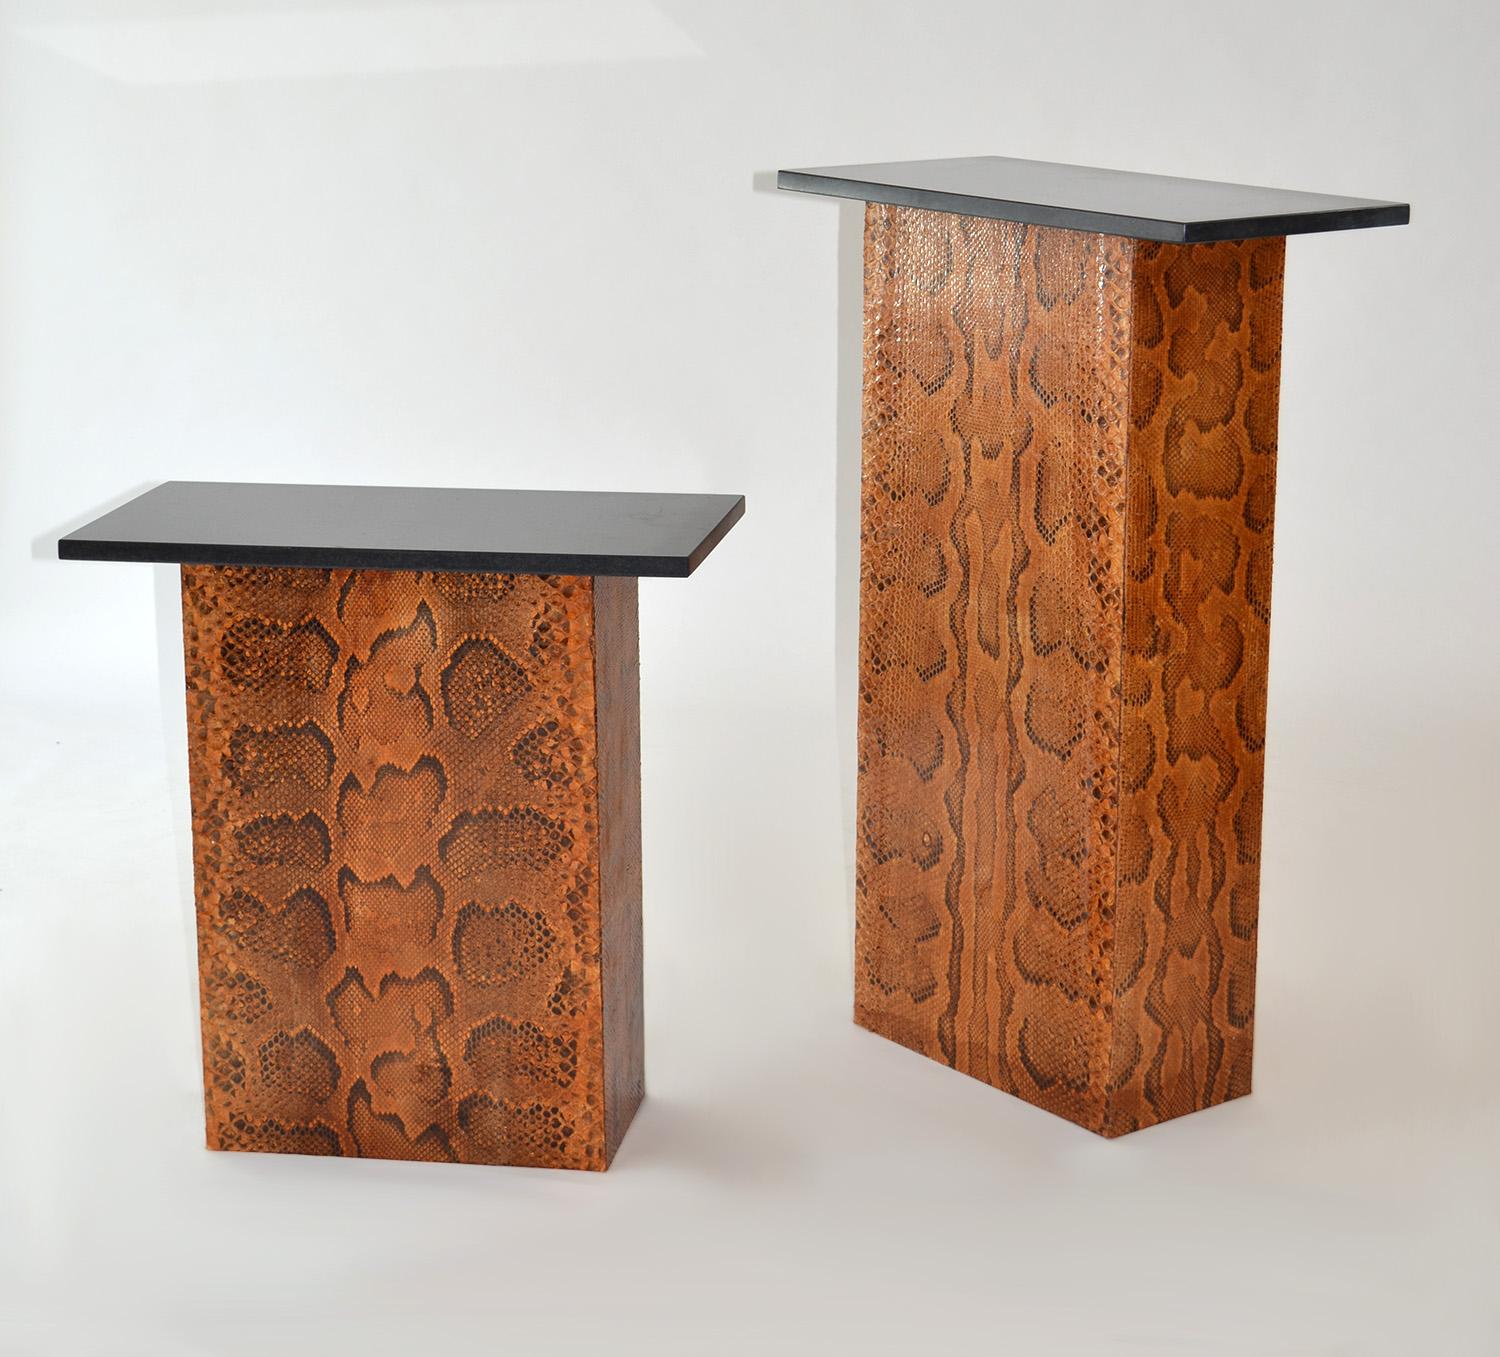 Pair of Rectangular Snakeskin and Stone Art or Display Pedestals, USA
Pair of pedestals or stands of wood wrapped in genuine Python skin topped with 3/4